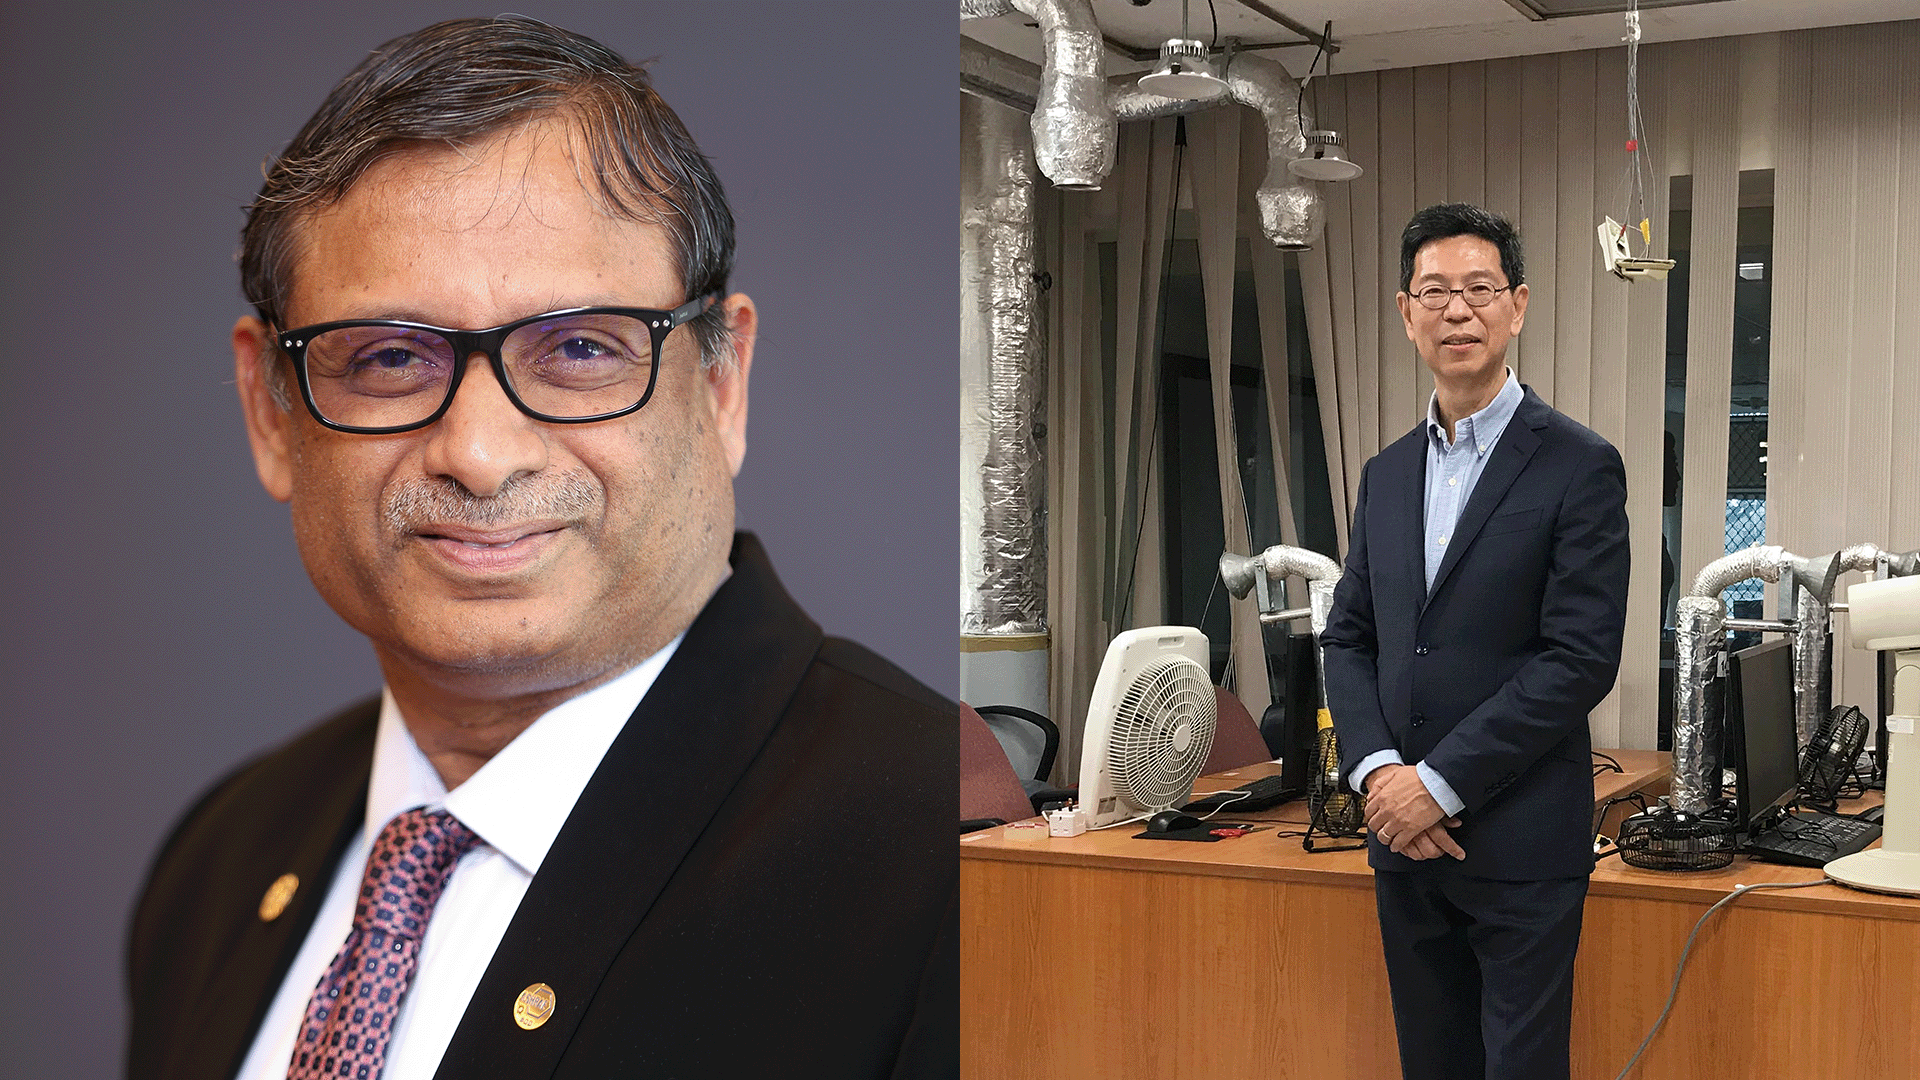 Prof Chandra Sekhar (left) and Assoc Prof Tham Kwok Wai (right) joined over 40 global scientists in co-authoring the policy article.